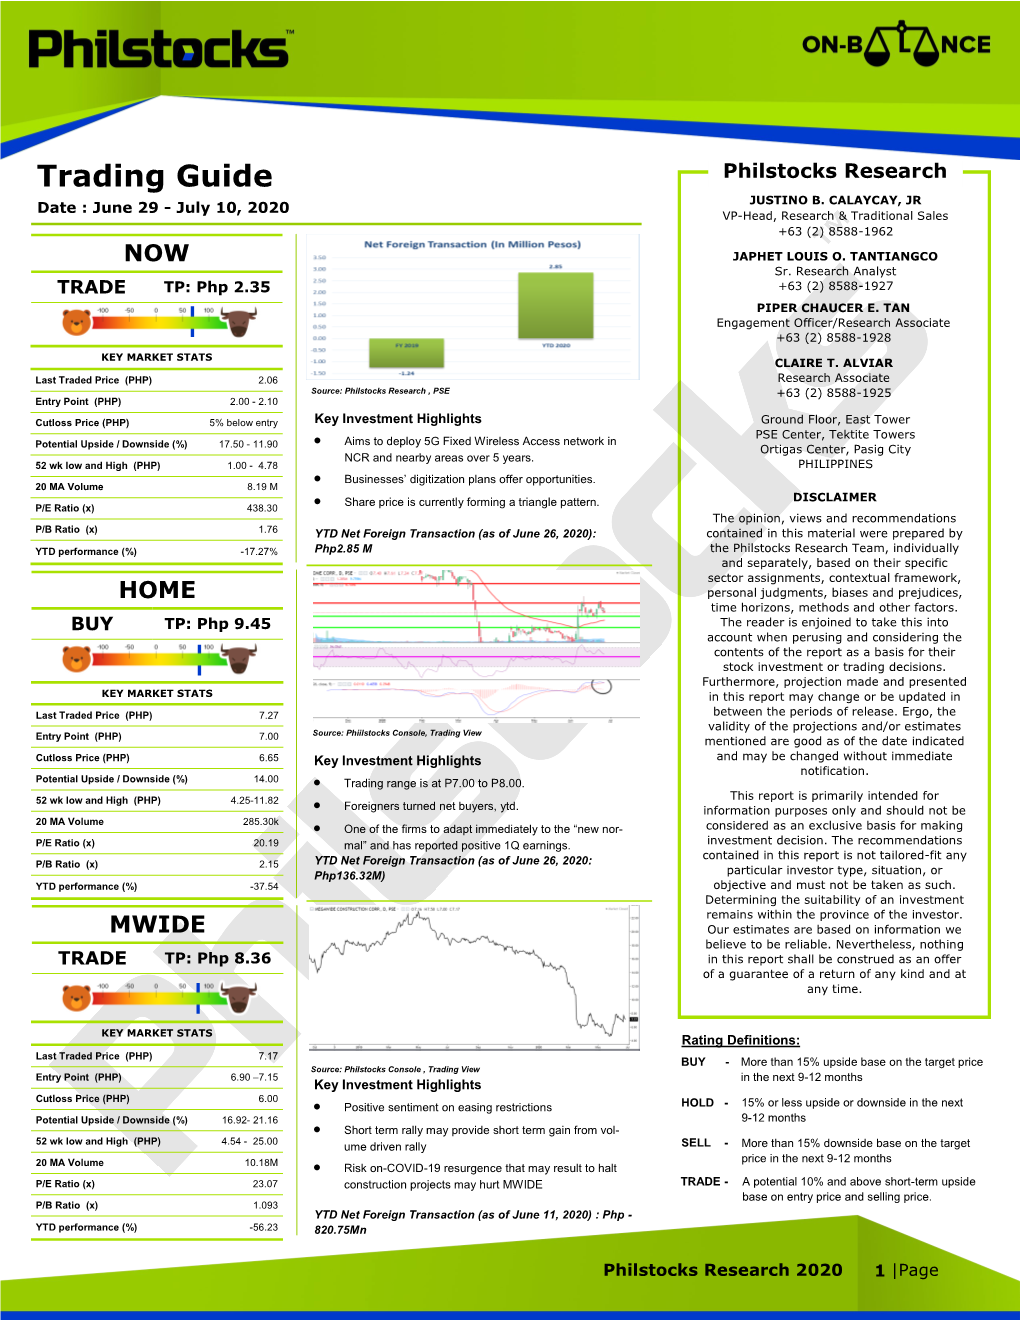 Trading Guide Philstocks Research JUSTINO B